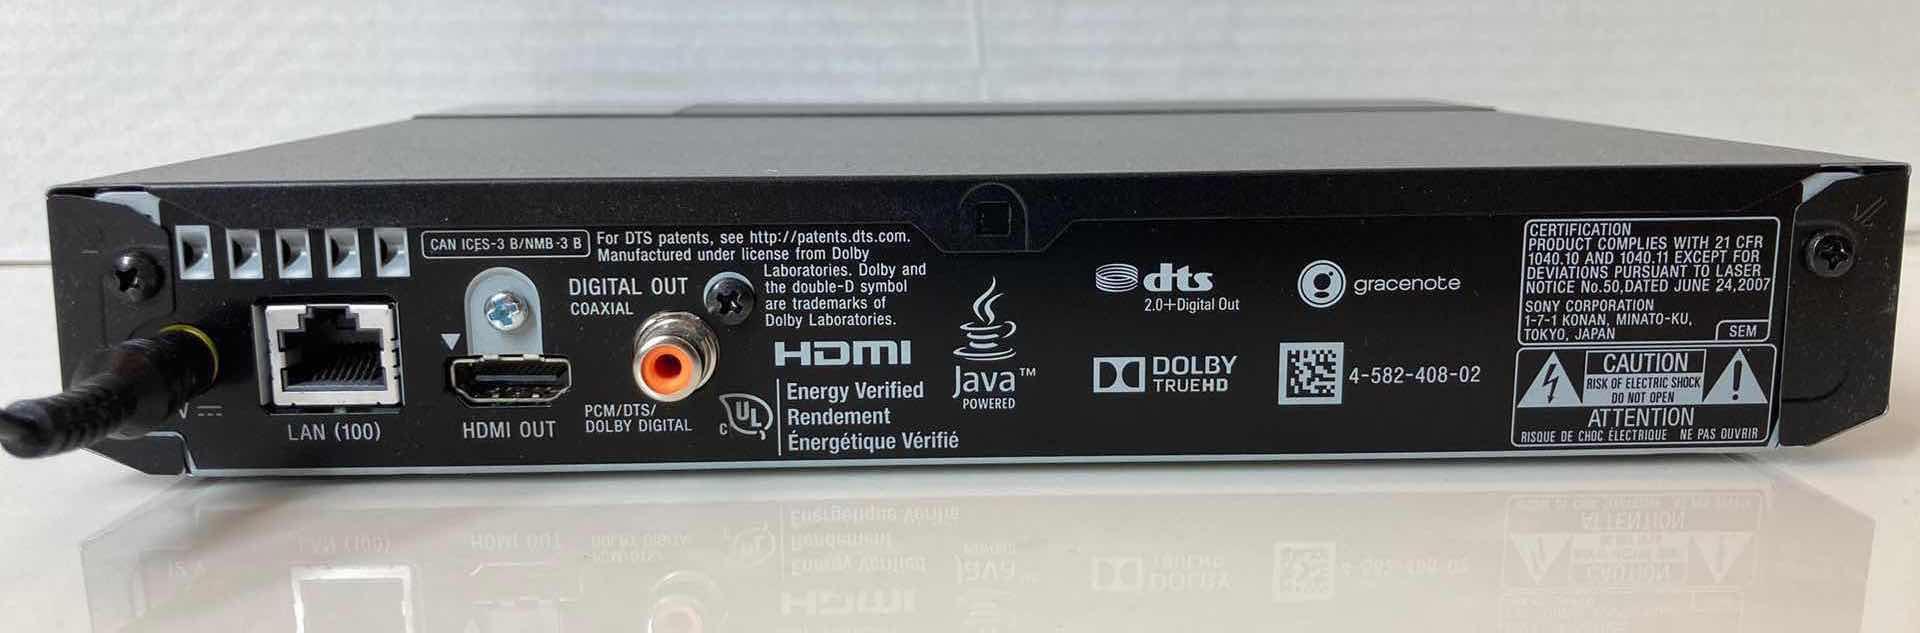 Photo 5 of SONY WIFI COMPATIBLE BLU-RAY DVD PLAYER MODEL BDP-S-3700 W REMOTE